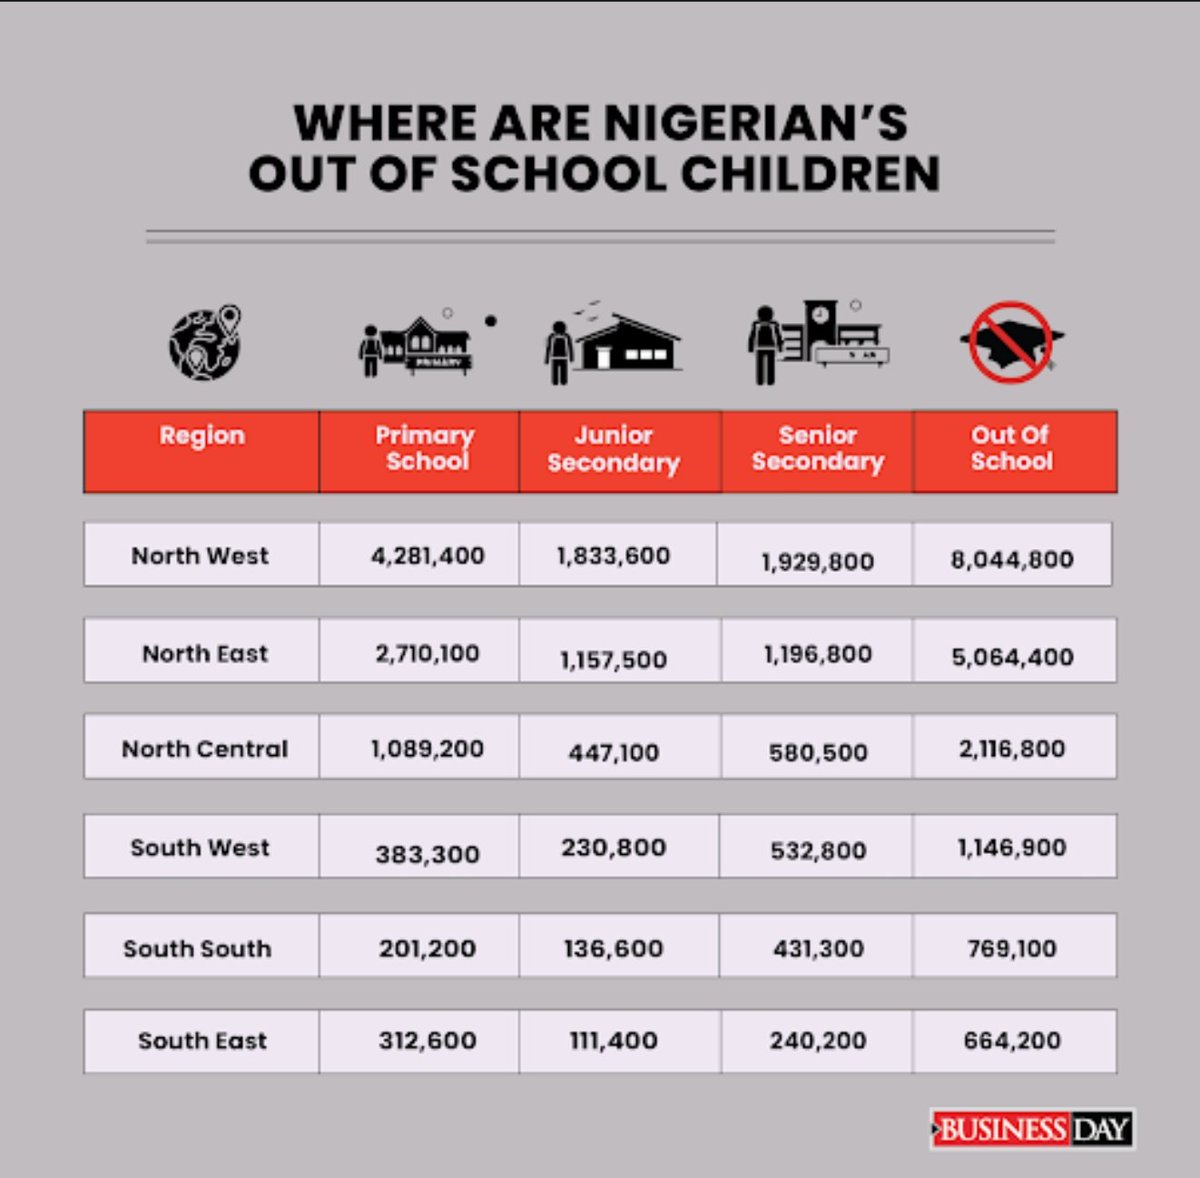 Out of school children in Nigeria is alarming. The number from South East is not acceptable.